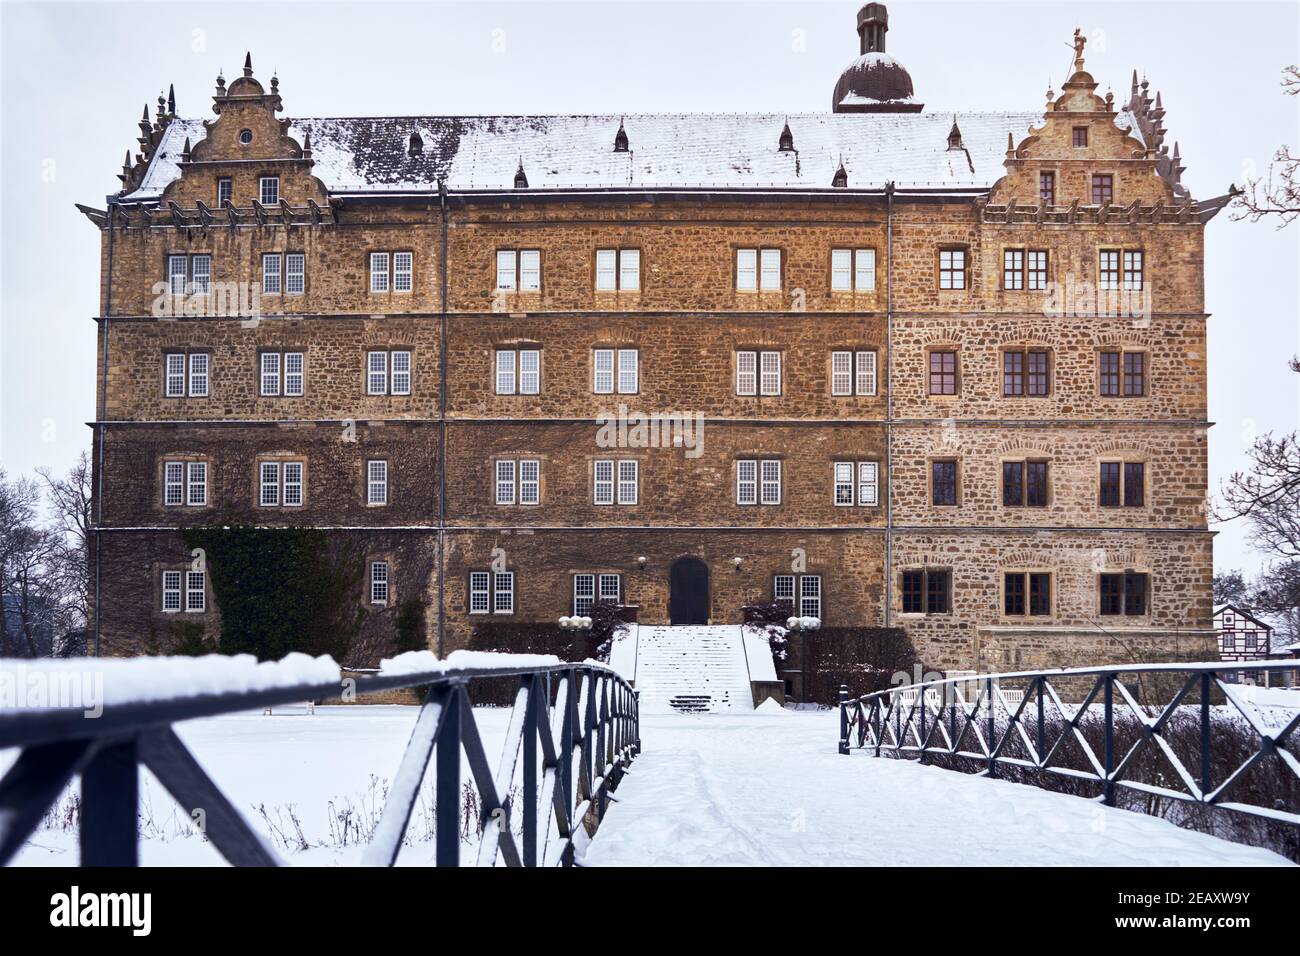 Rear side of Wolfsburg Castle in winter with view from a snow-covered bridge over the millrace Stock Photo